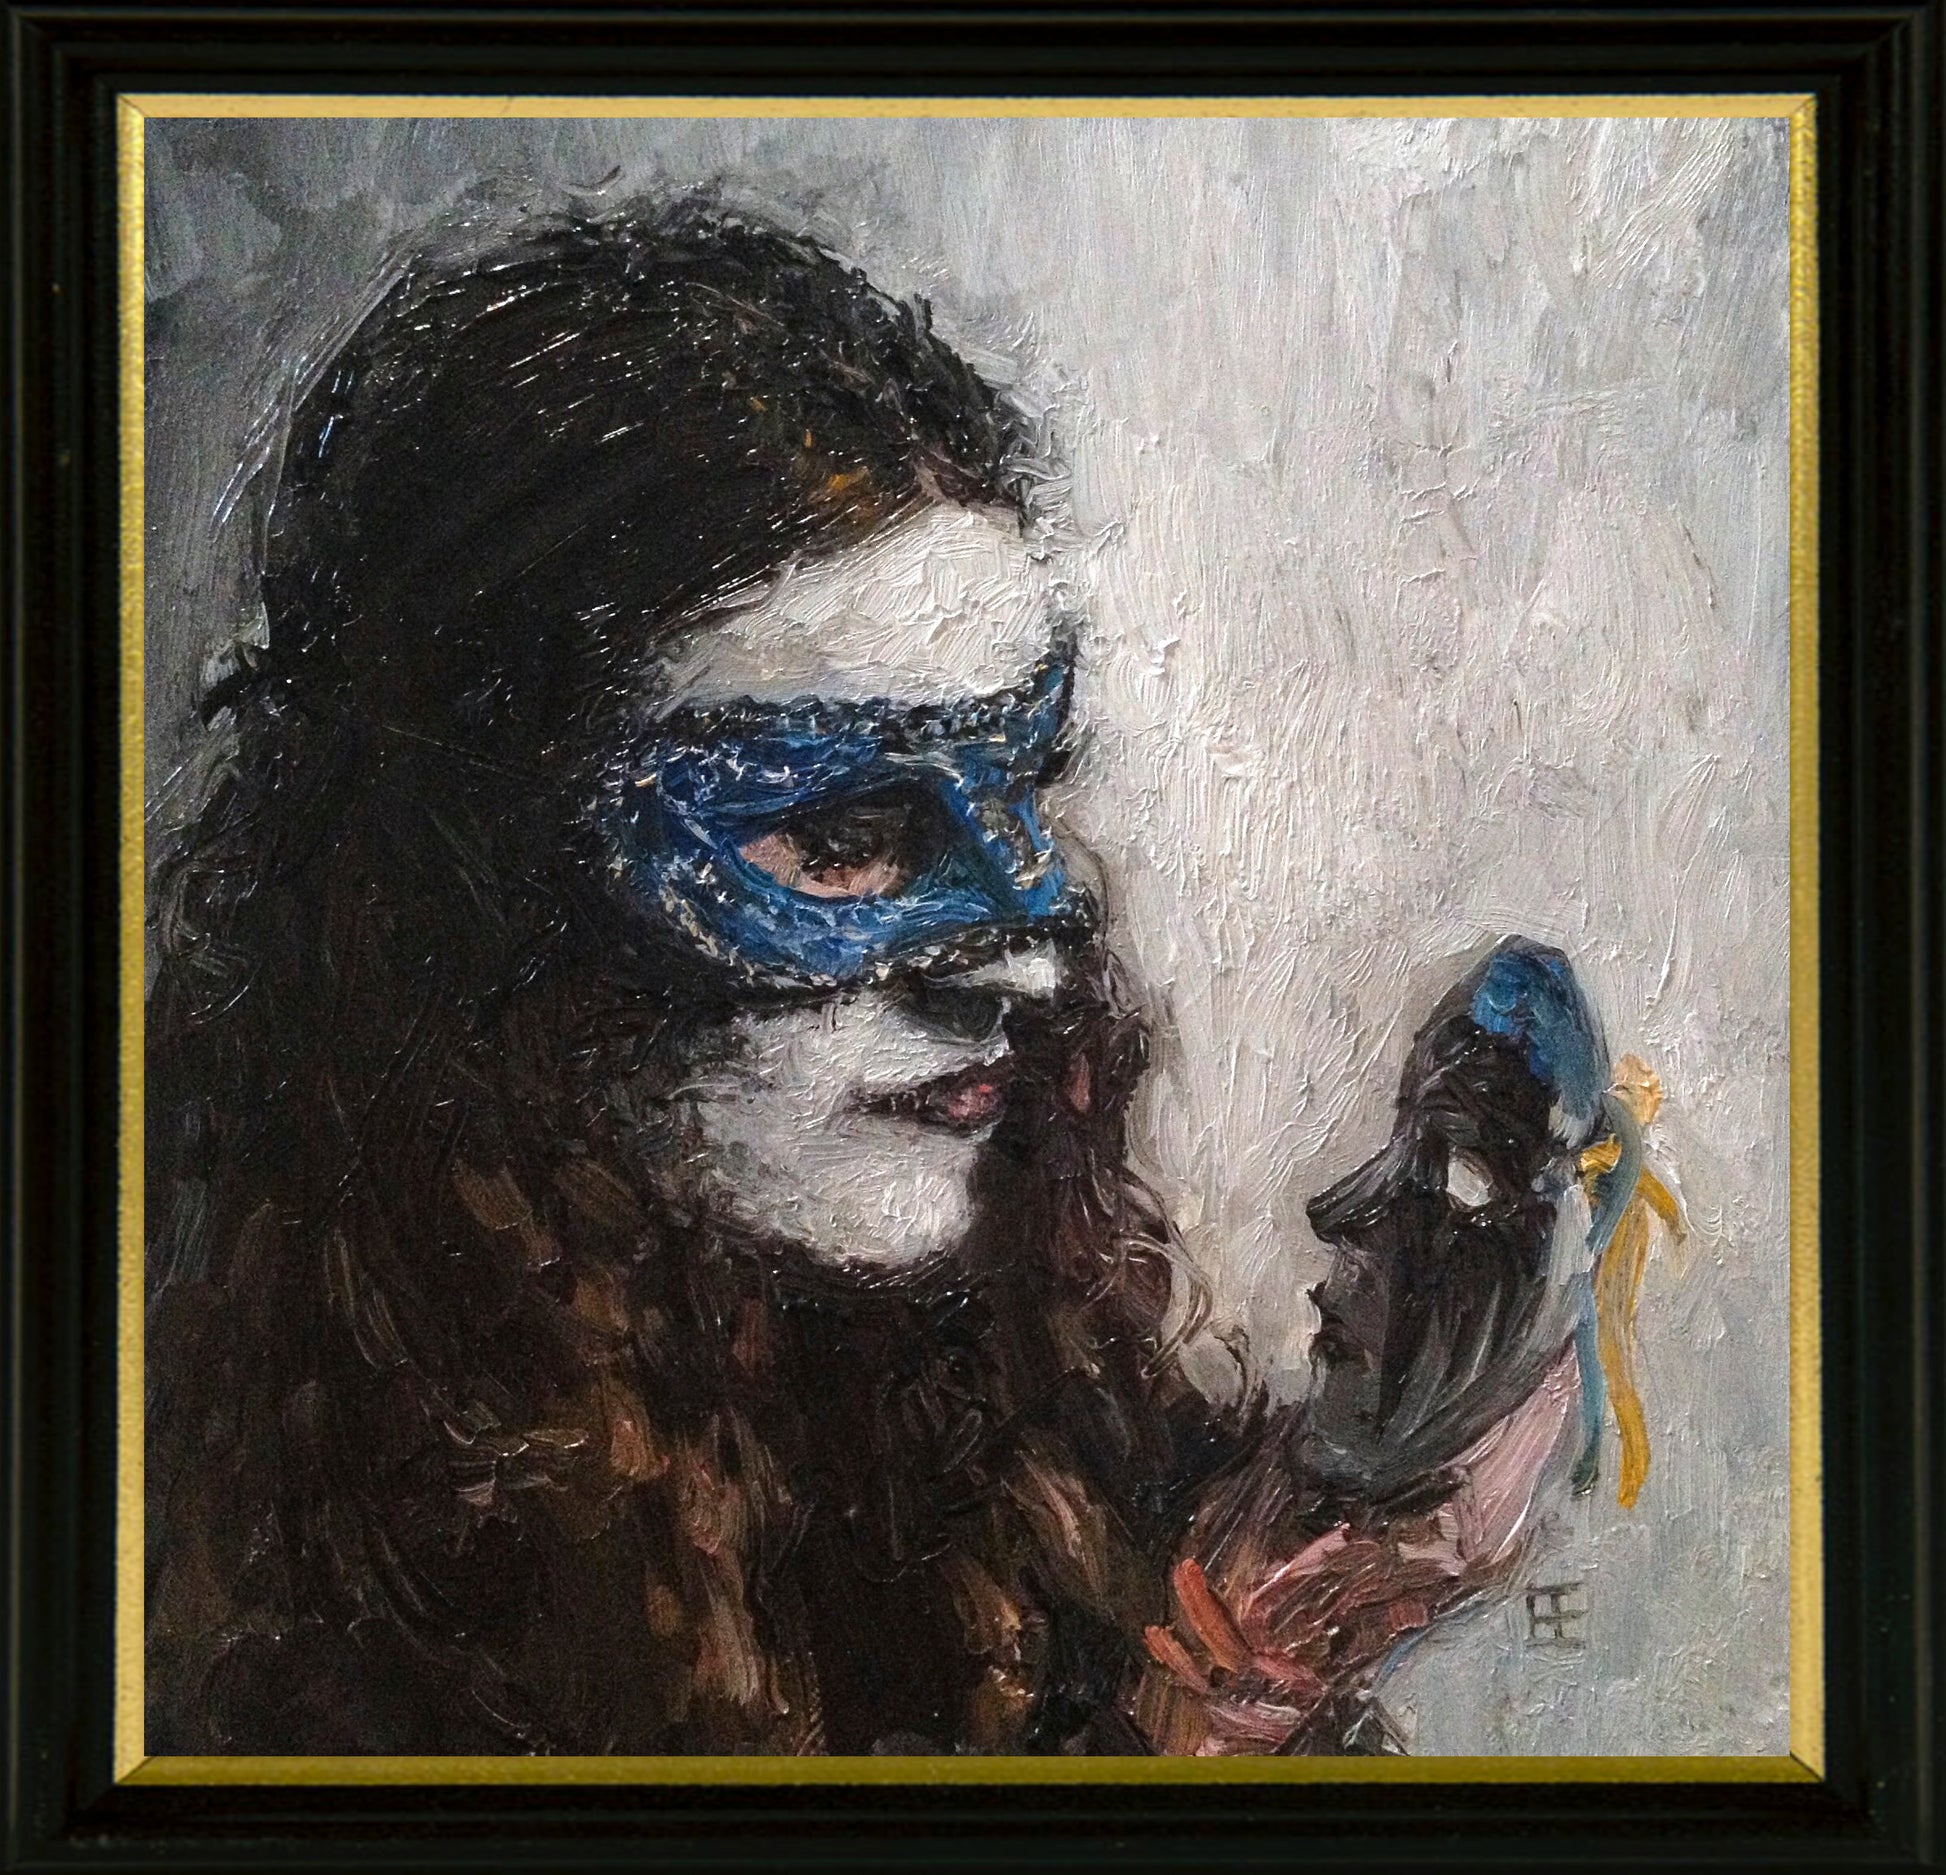 Masked woman with white make up wearing blue mask holds up a new black mask to consider; artist E. E. Jacks; 8"Wx8"H framed